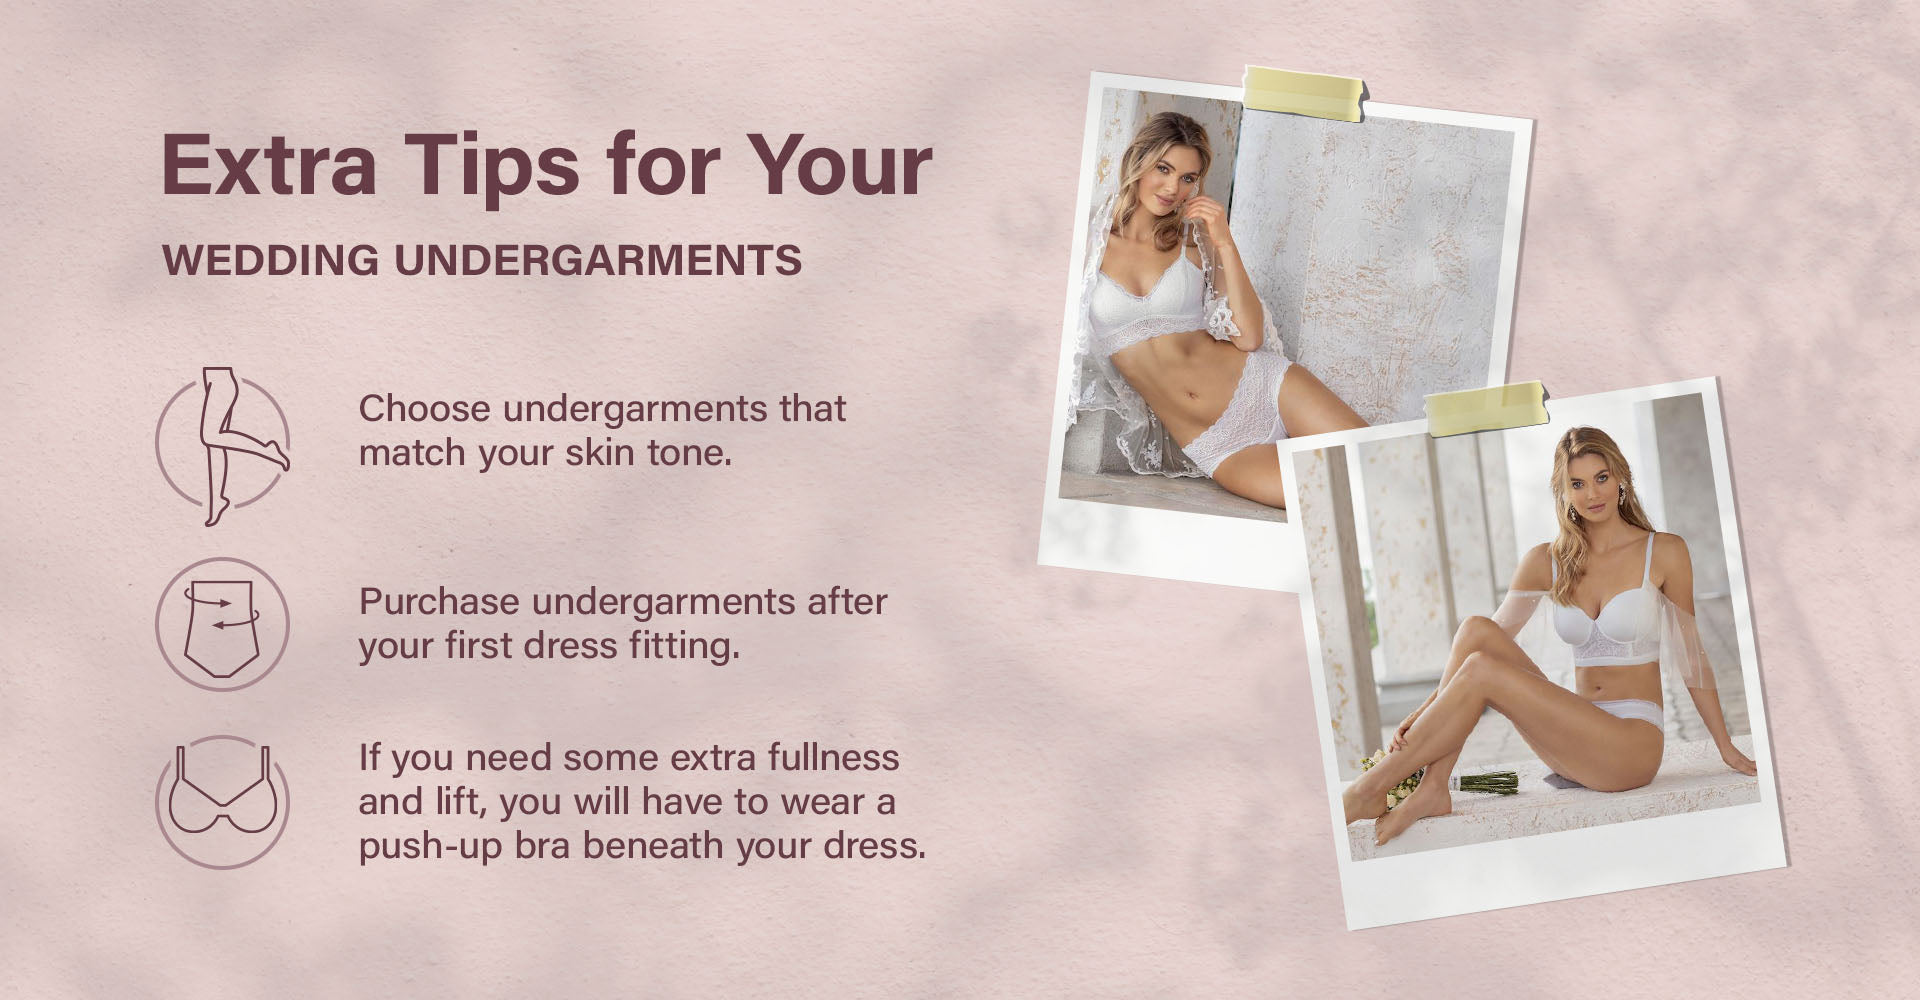 Extra Tips for Your Wedding Undergarments